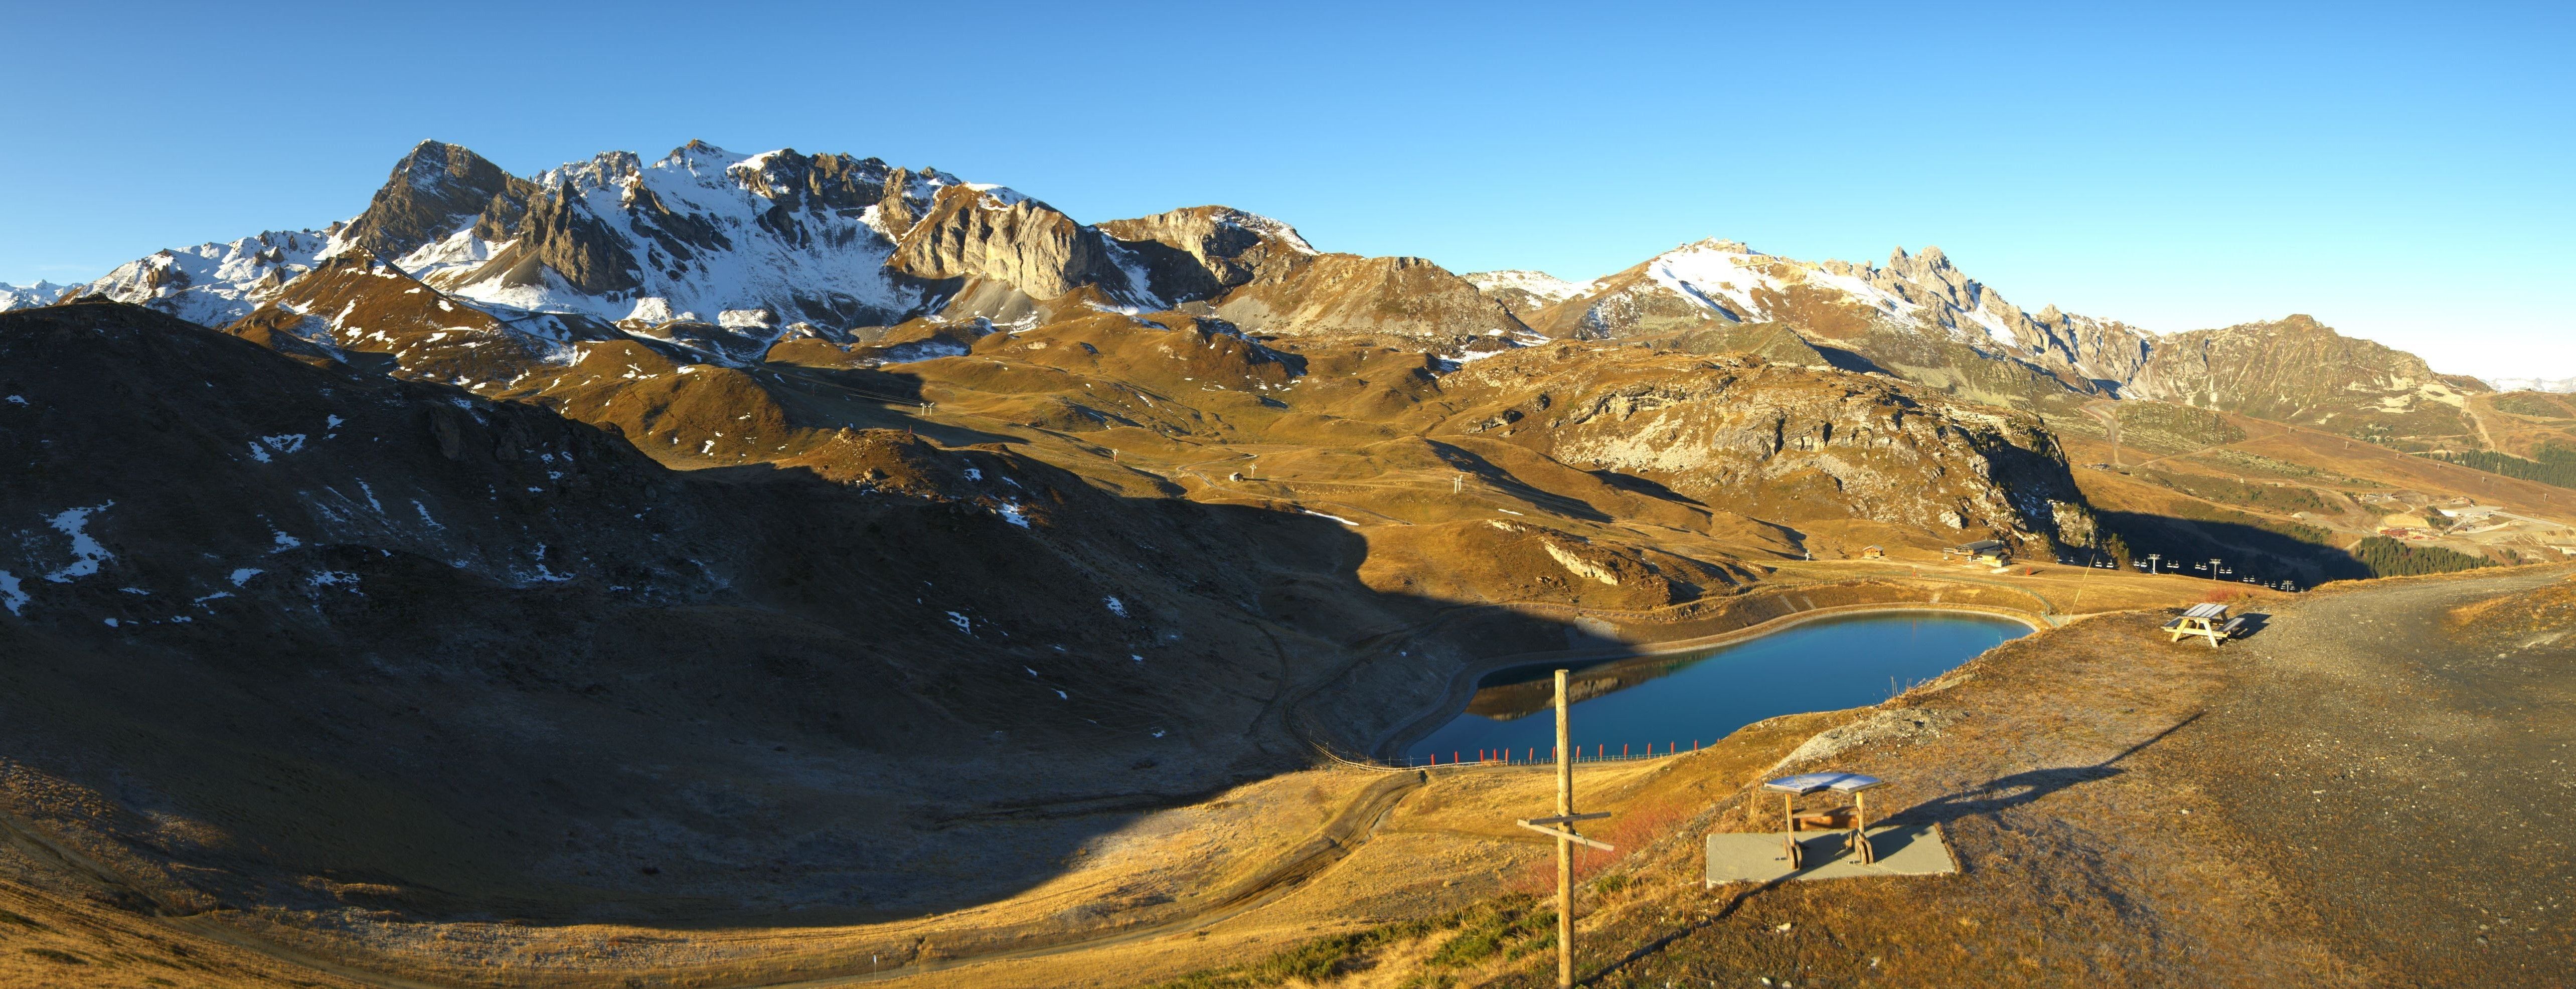 Wonderful autumn weather in Courchevel this morning